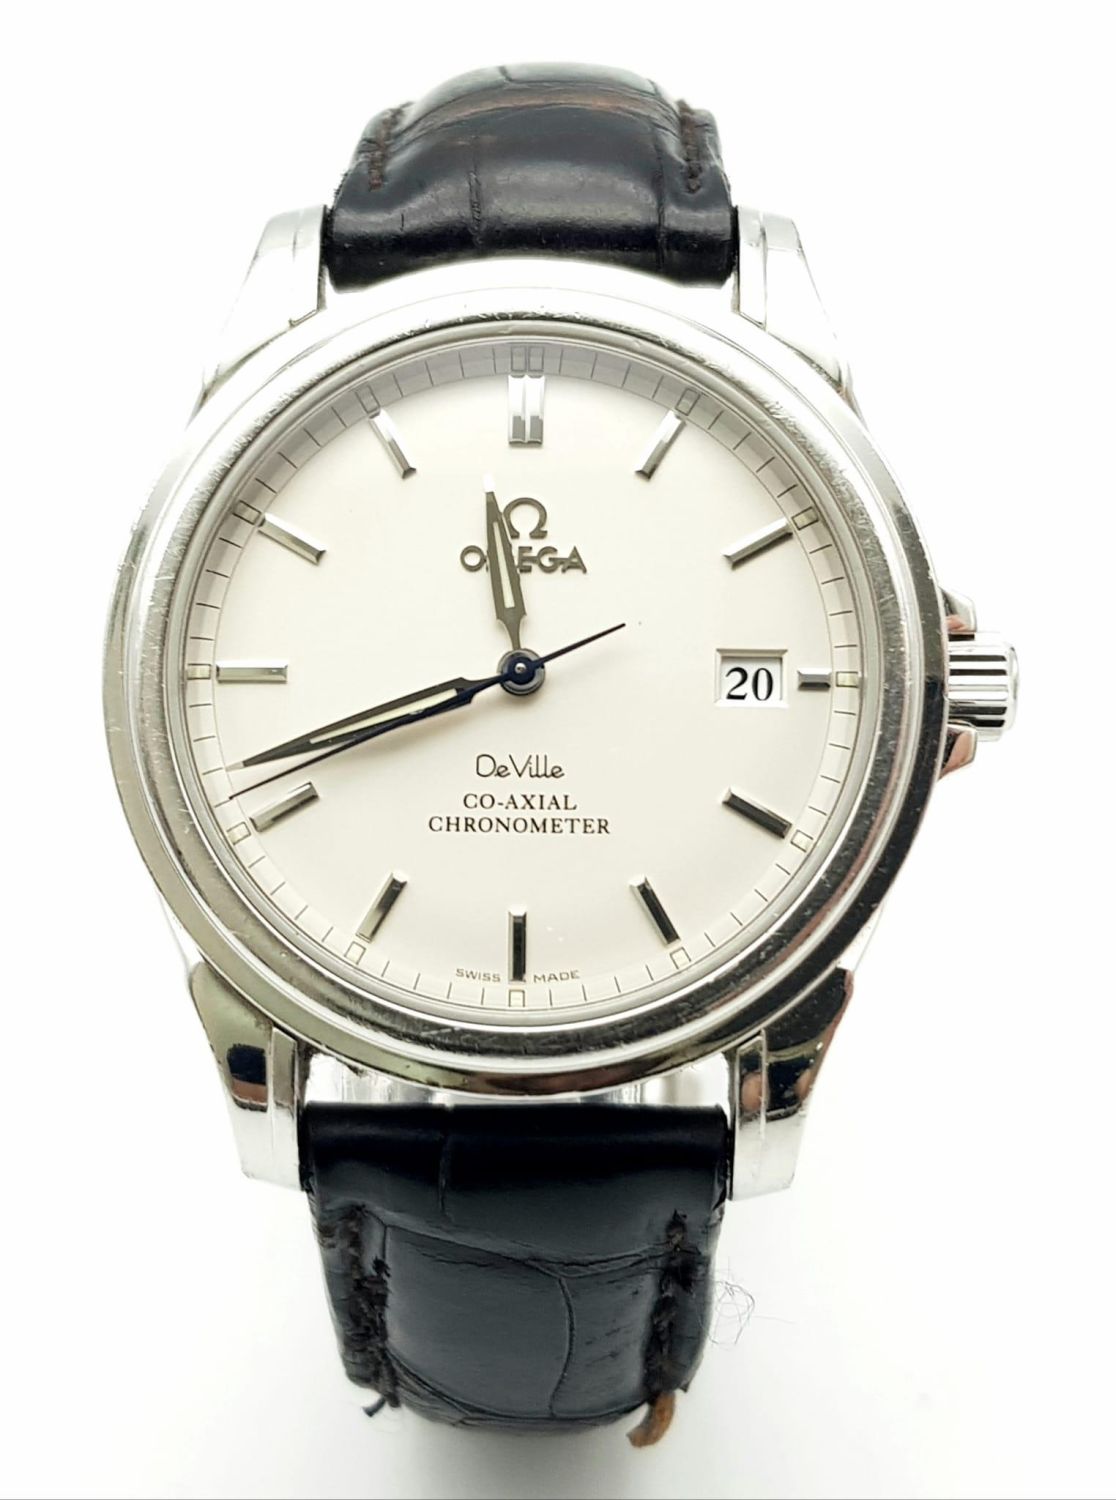 OMEGA DE VILLE CO AXIAL CHRONOMETER STAINLESS STEEL WATCH, WHITE FACE AND DIALS WITH BLACK LEATHER - Image 3 of 12